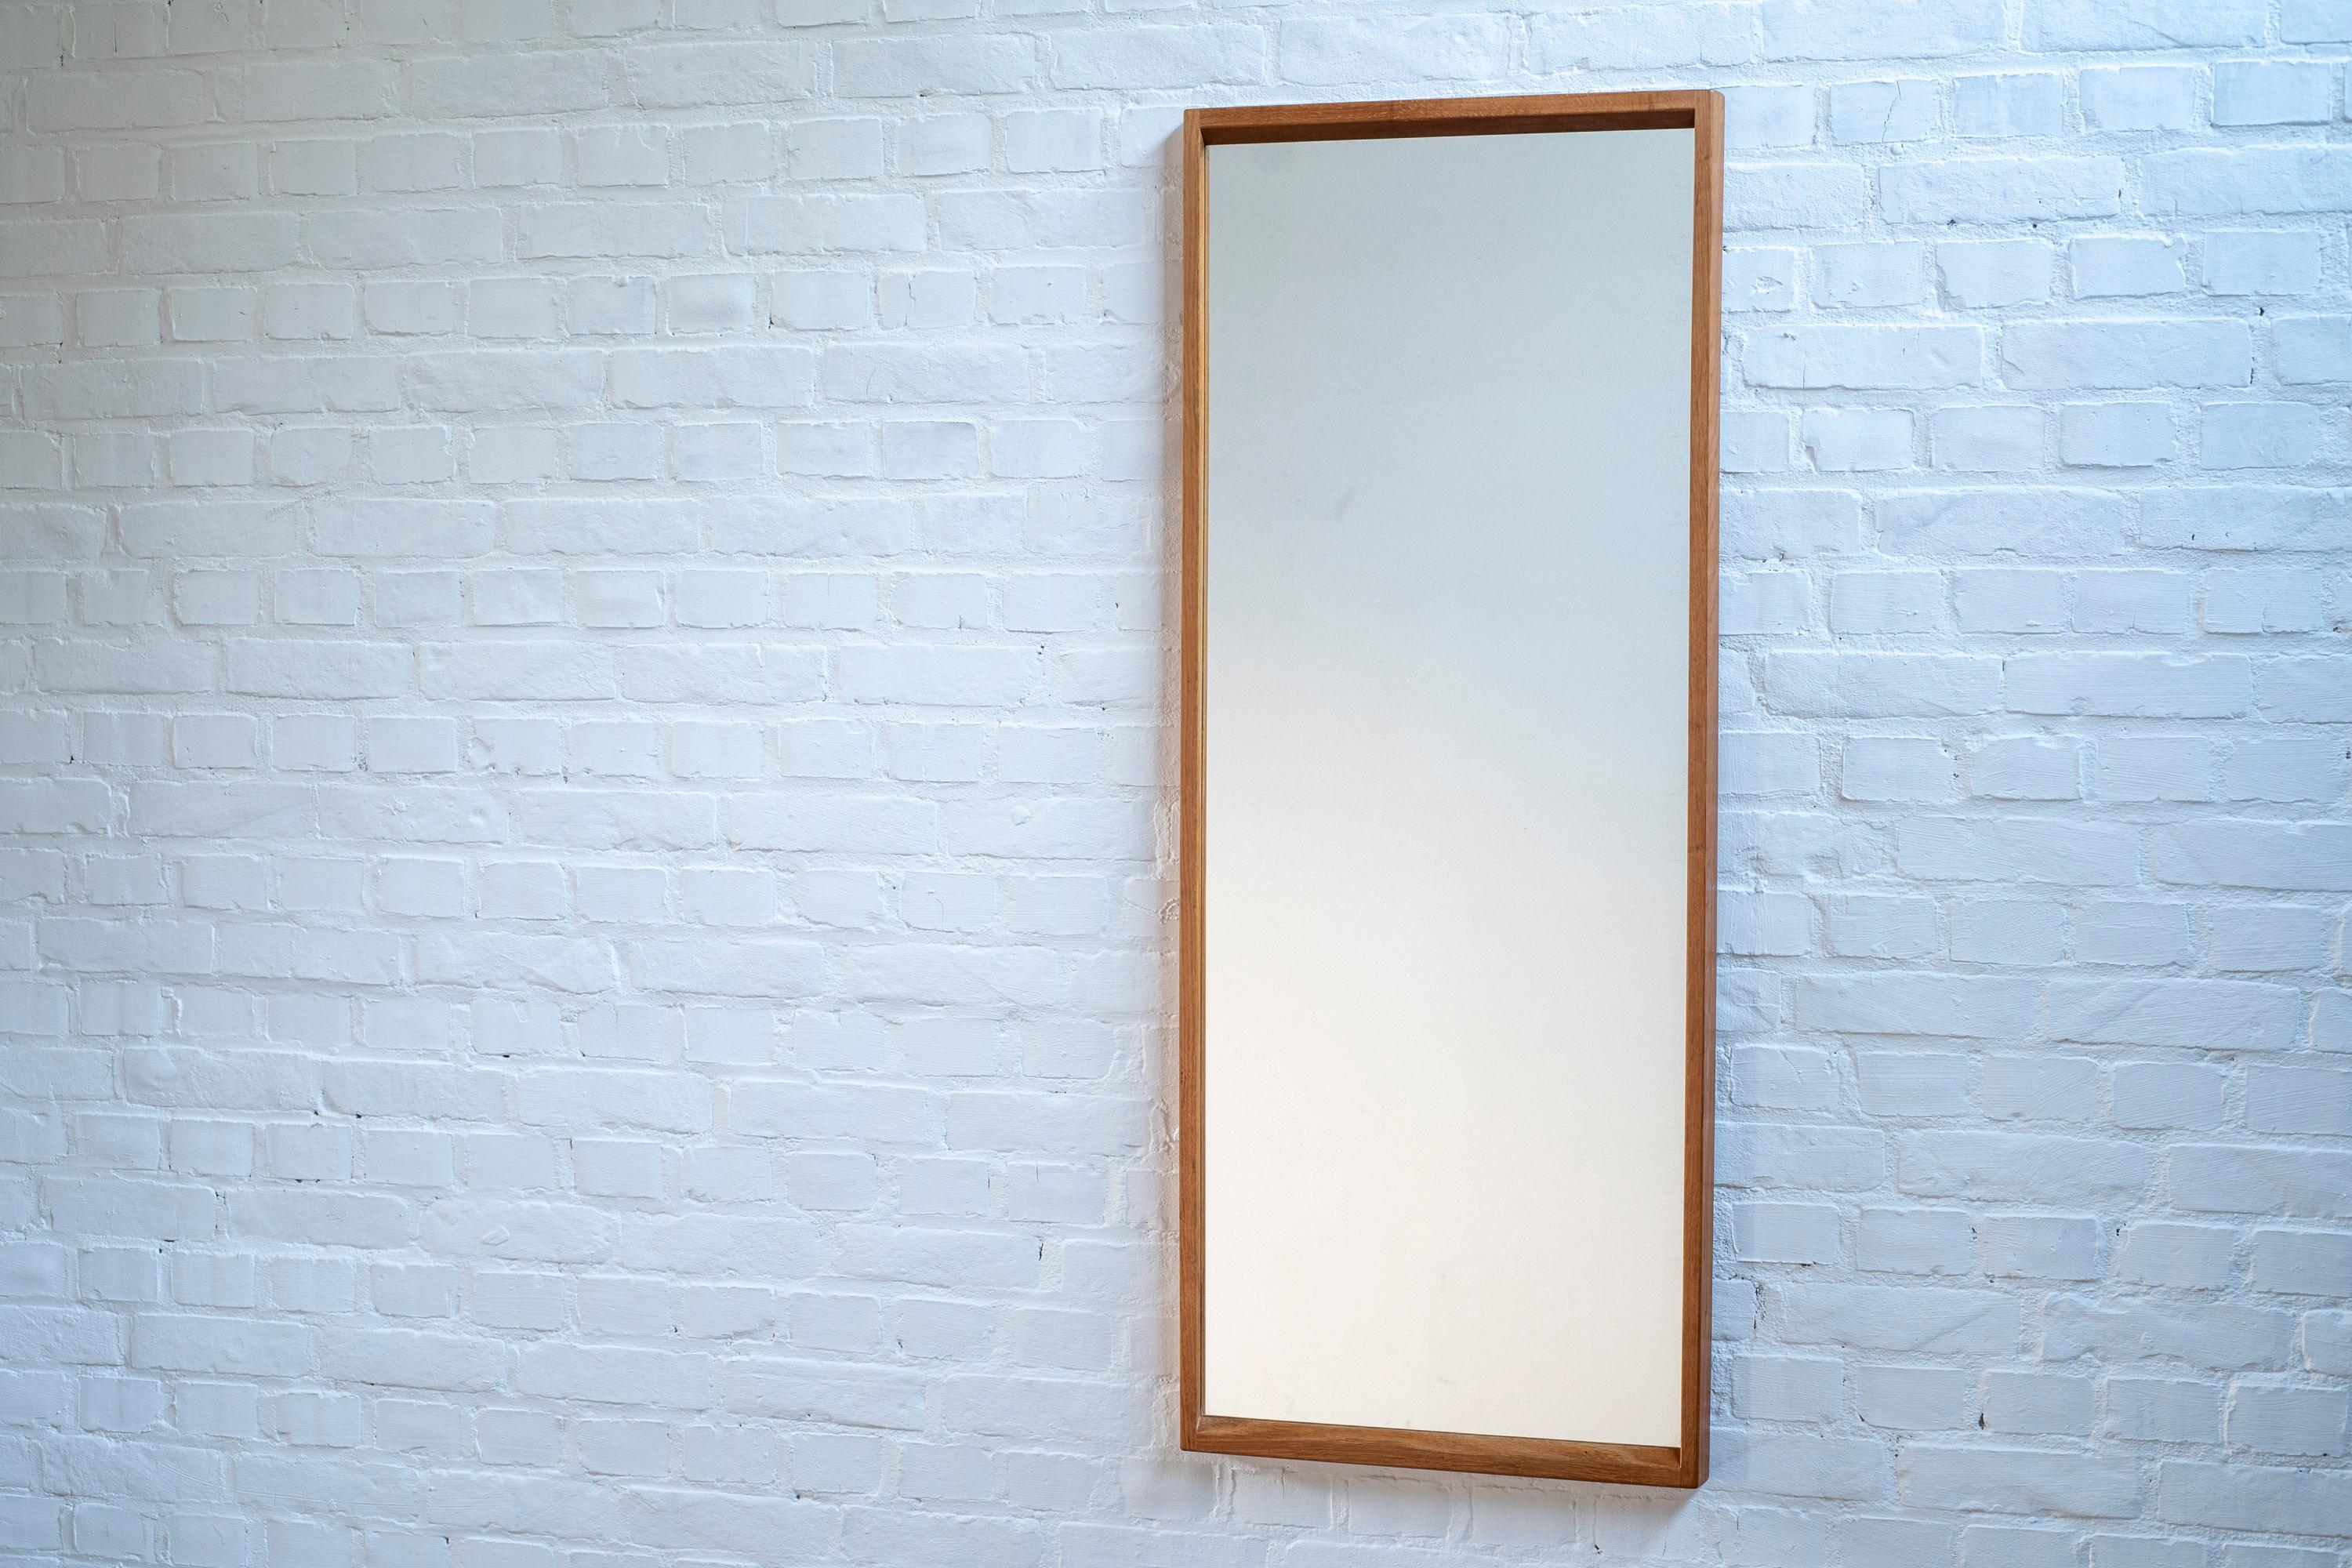 A beautiful oak mirror by designer Kai Kristiansen, produced by Aksel Kjersgaard in Odder, Denmark. Elegant design combined with wonderful craftsmanship and joinery. The mirror is in good vintage condition with normal traces of use in accordance to